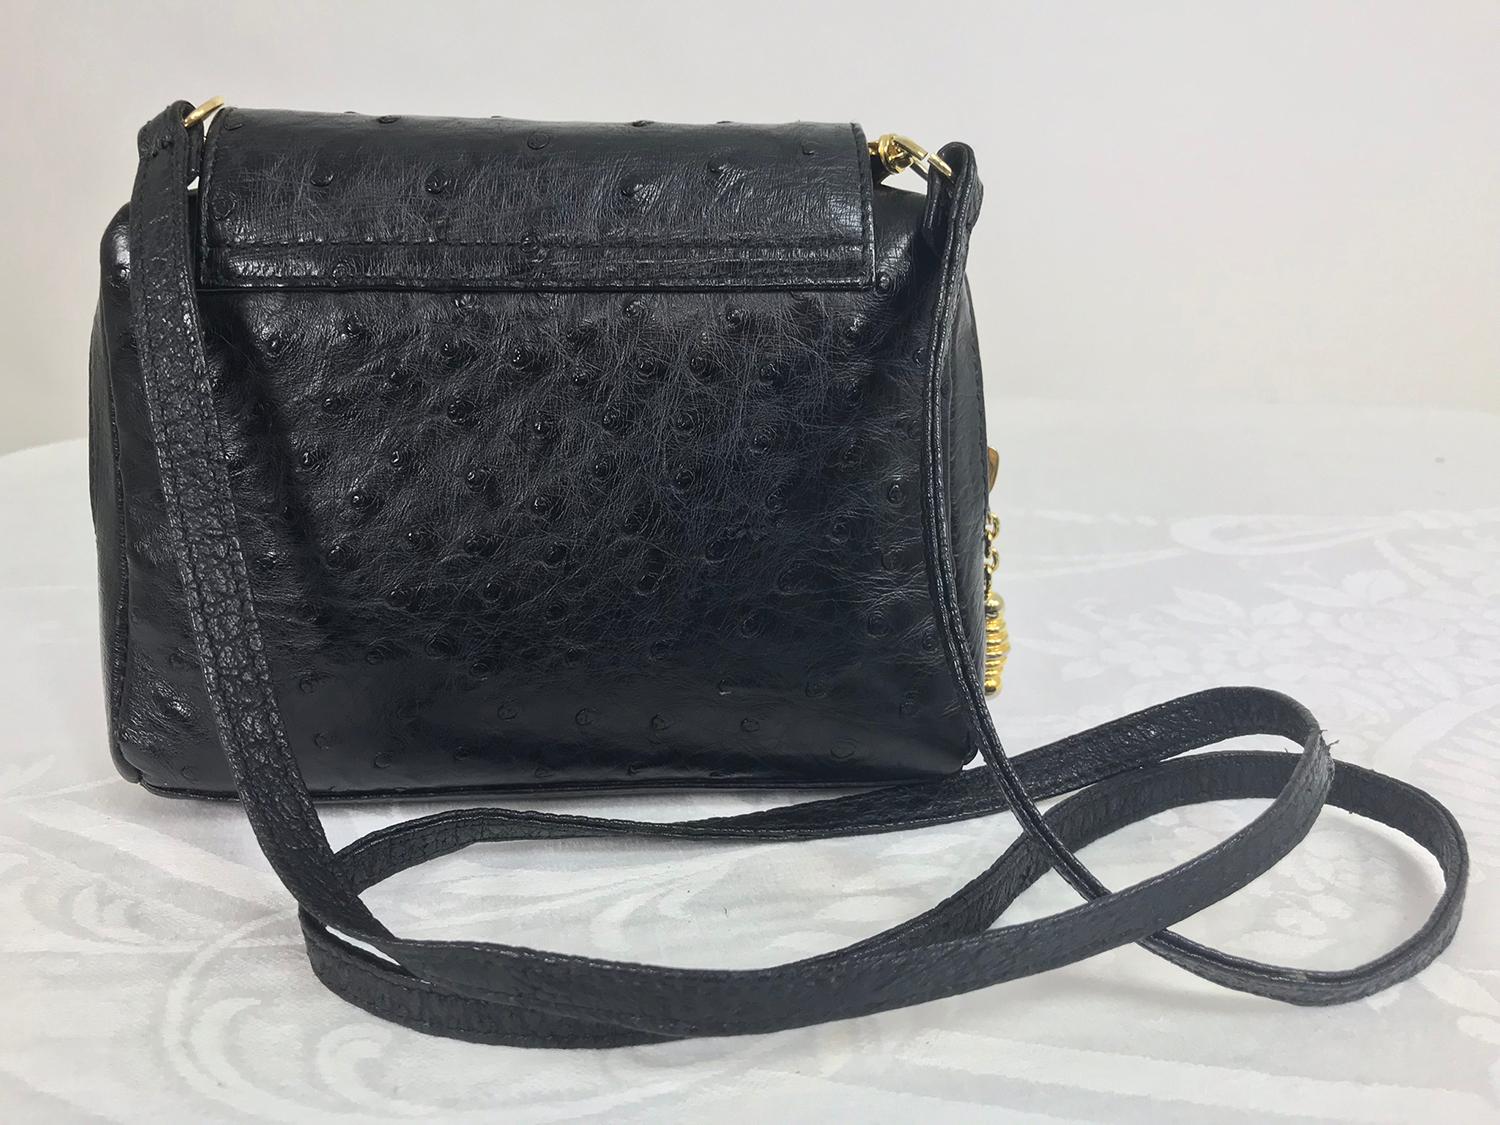 Helene Black Ostrich Cross Body/Clutch handbag Made in Italy 1990s In Excellent Condition For Sale In West Palm Beach, FL